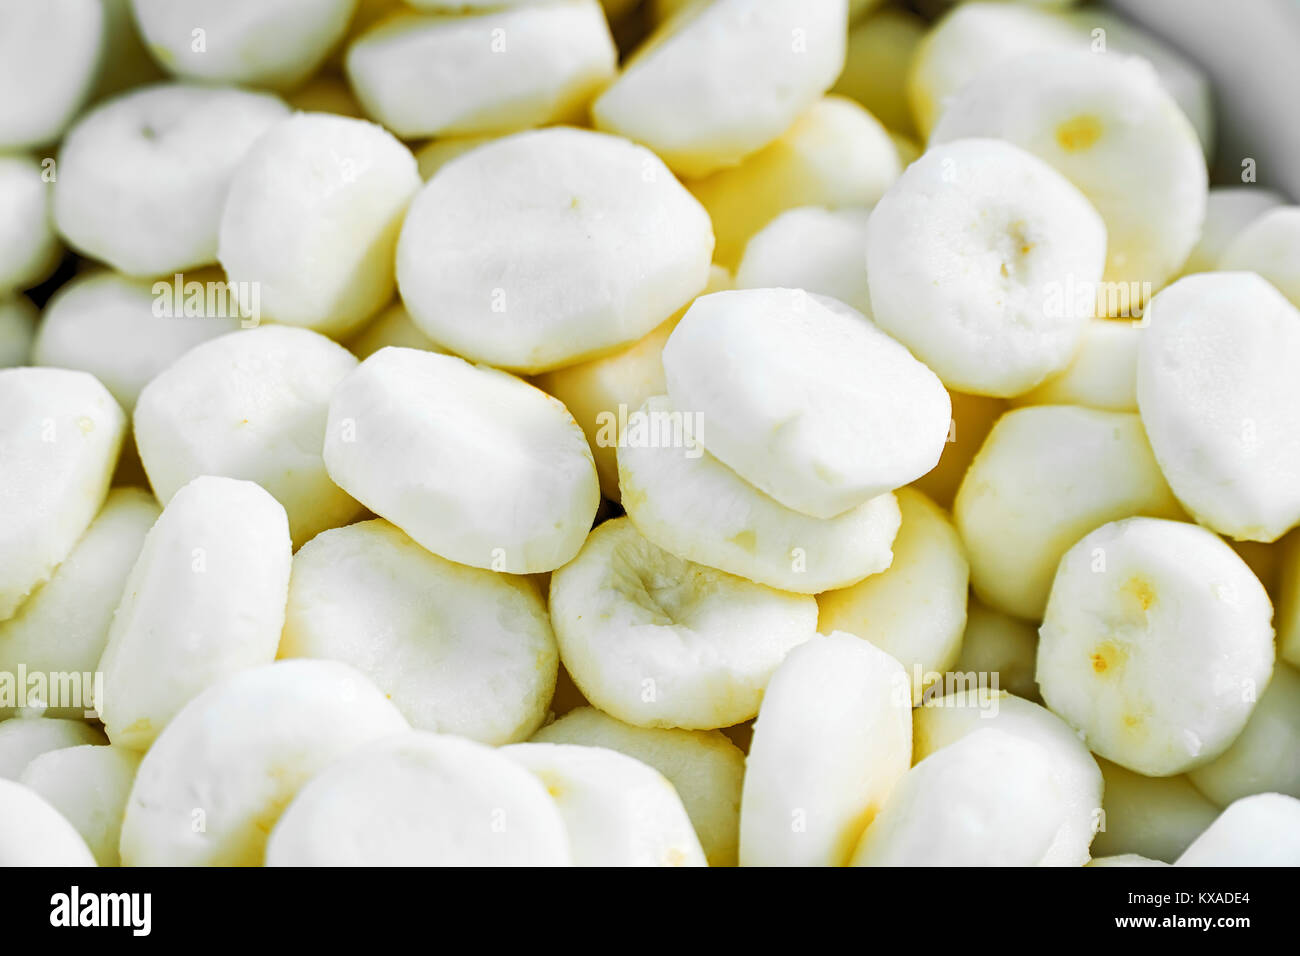 Chinese water chestnut or matai - food raw for background. Stock Photo